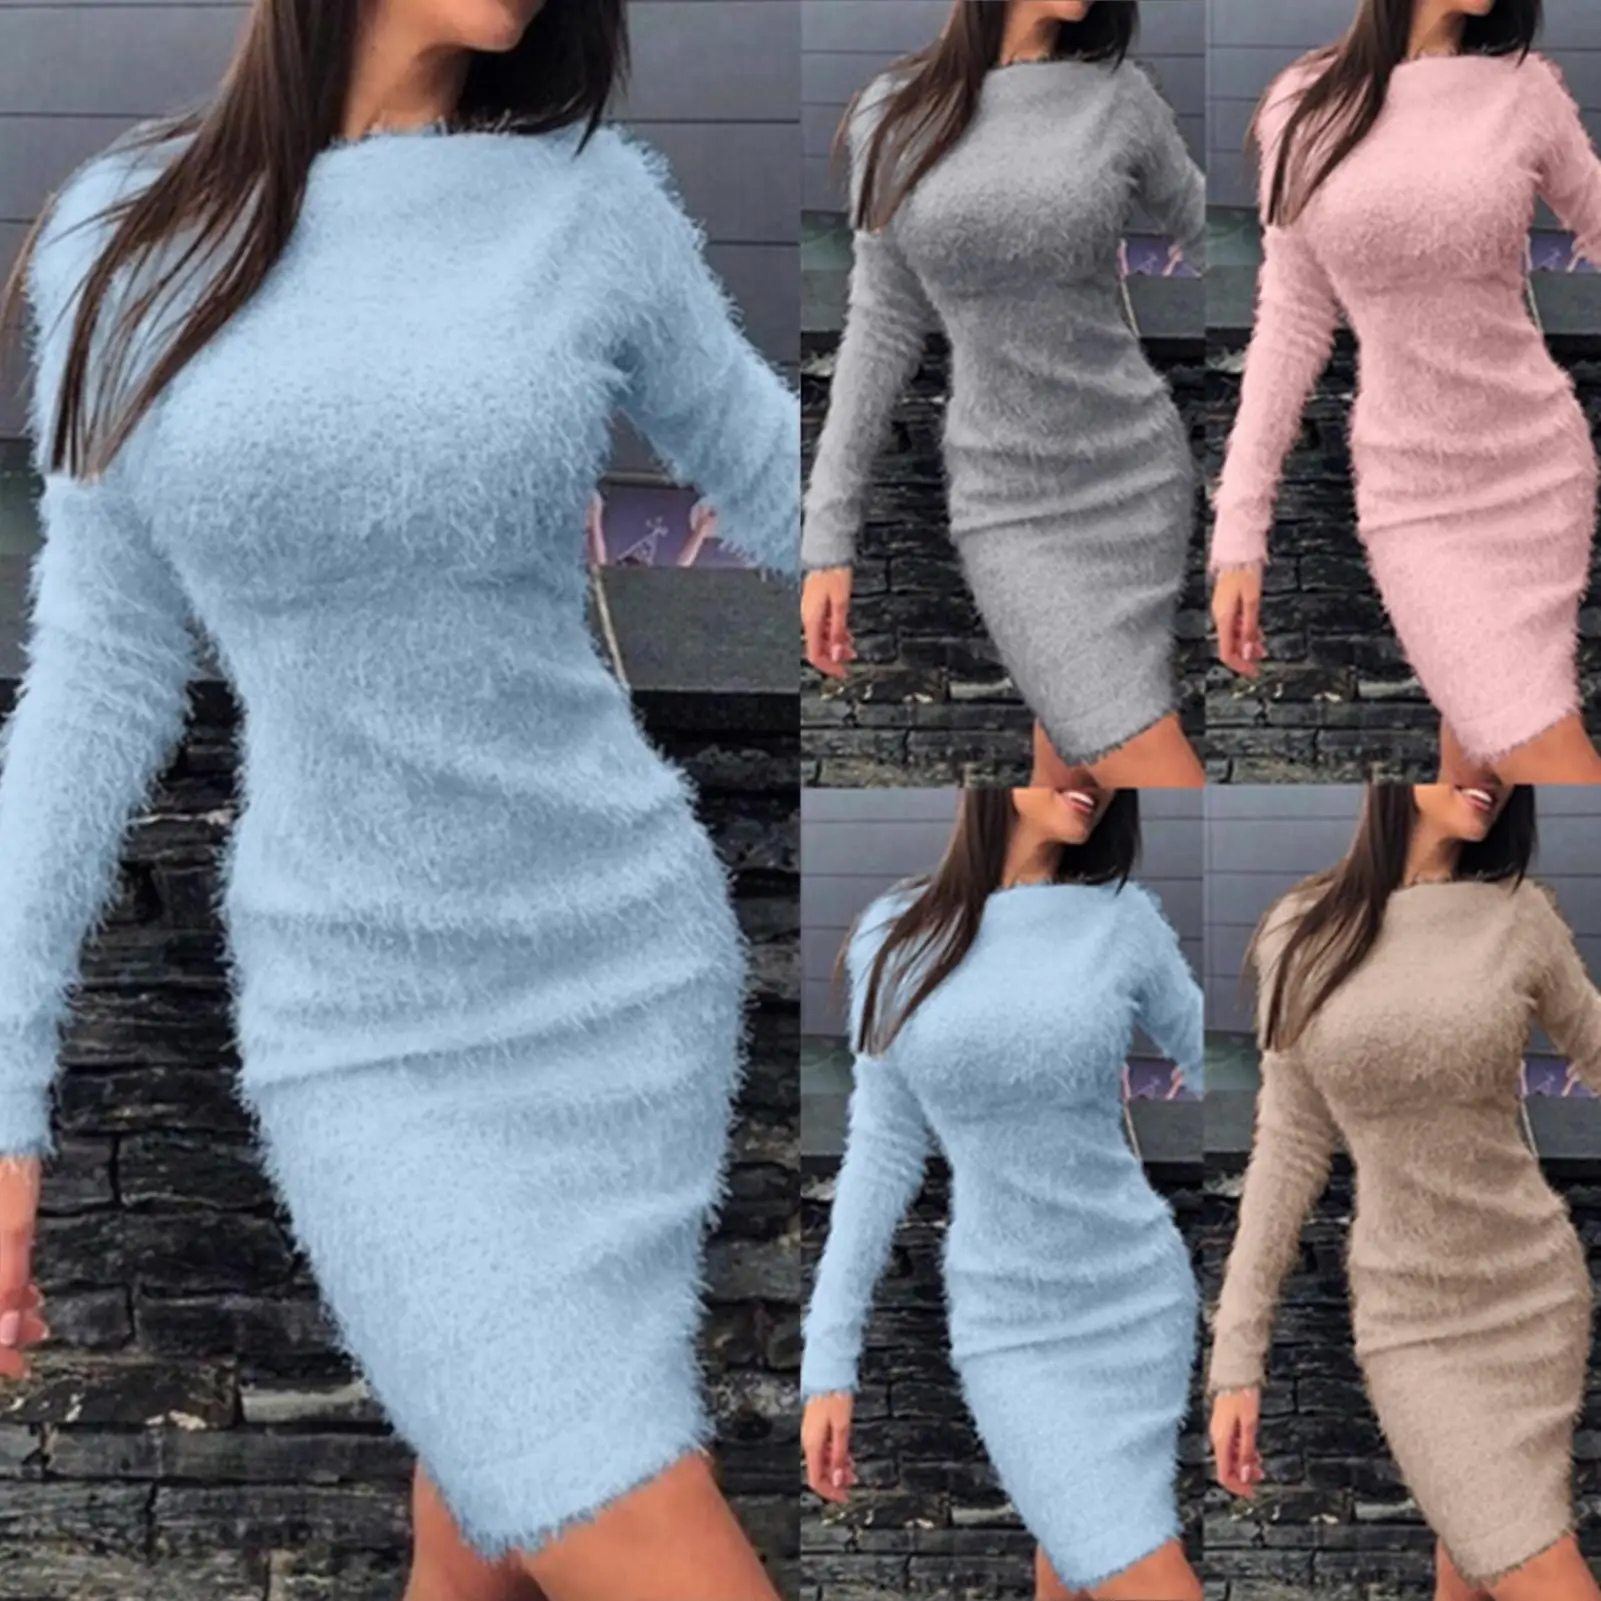 Women Autumn Fashion Dress Solid Color Long Sleeve Sweater Fluffy Kee-length Bodycon Dress Plus Size 3XL Warm Clothes For Female